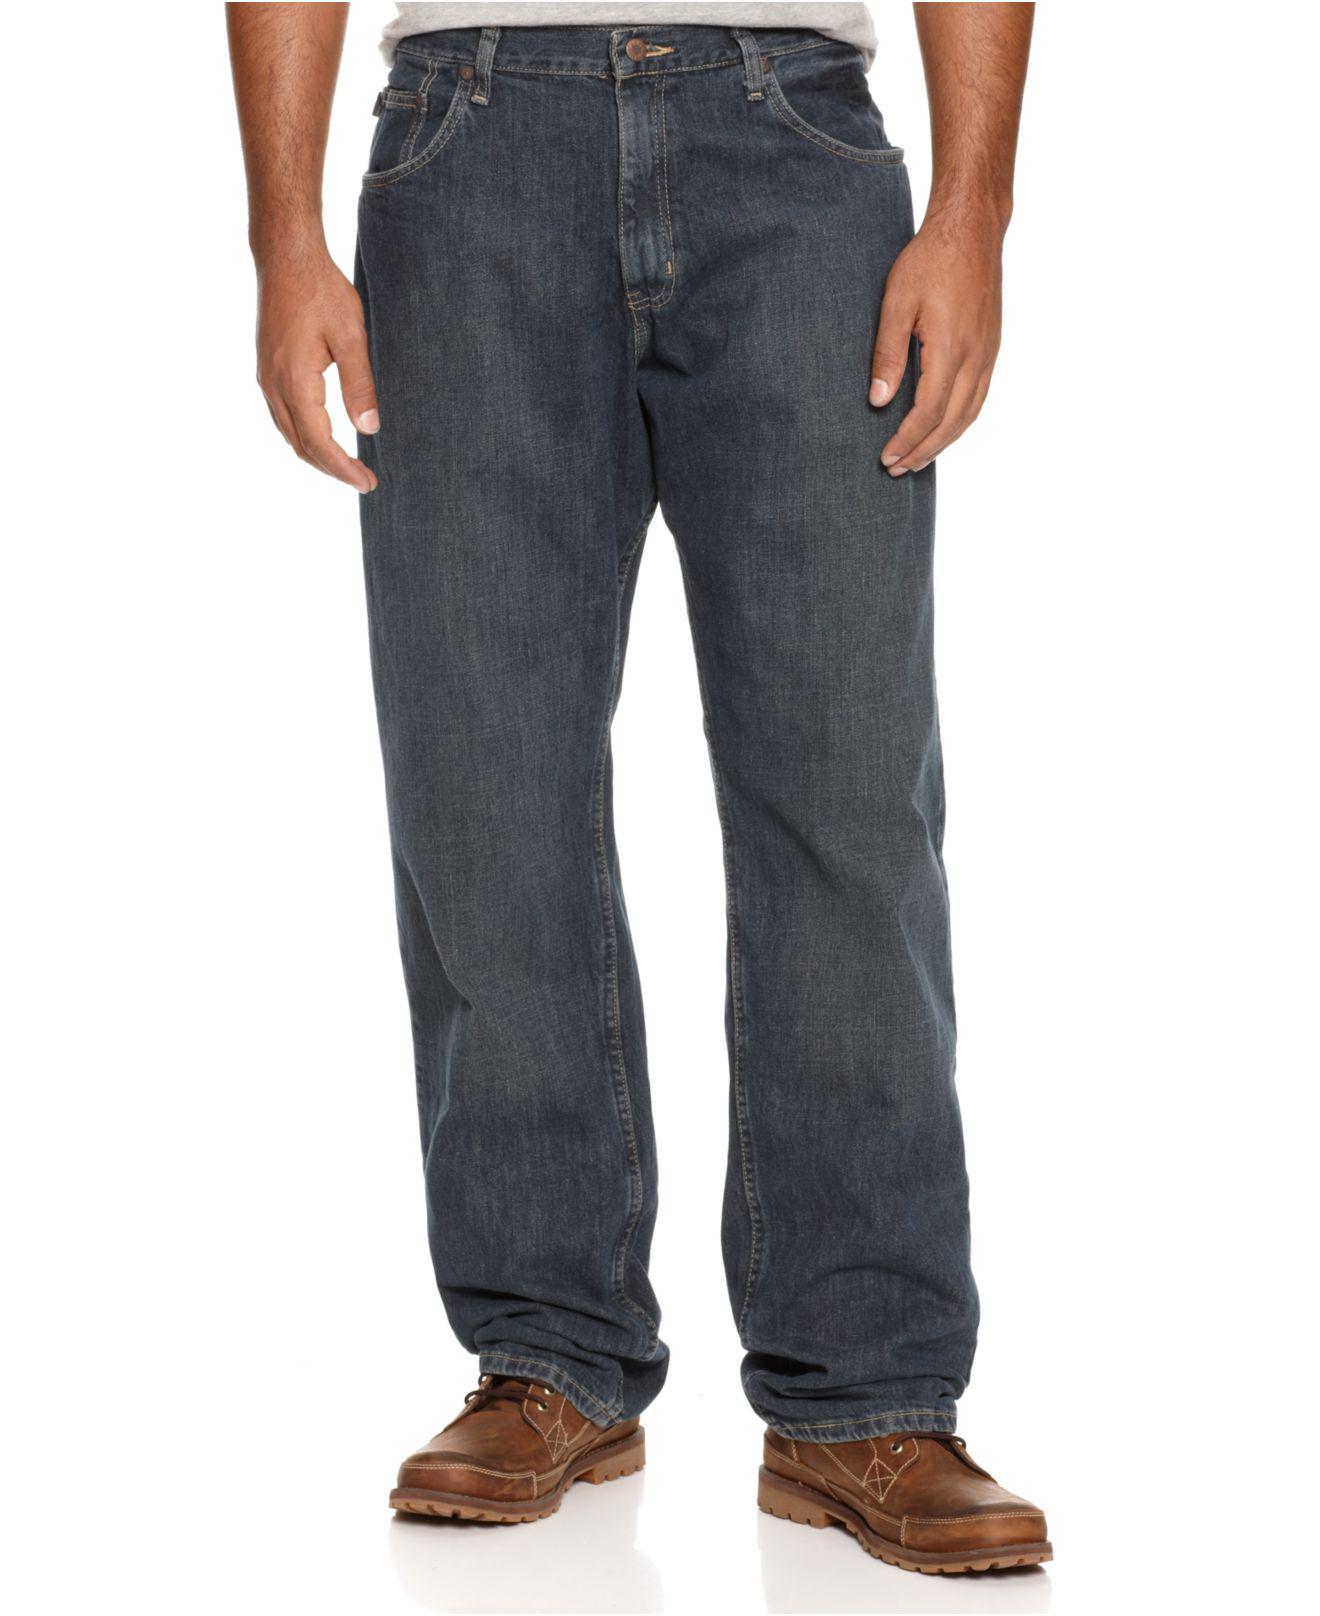 Nautica Denim Jeans, Relaxed-fit Jeans in Blue for Men - Lyst